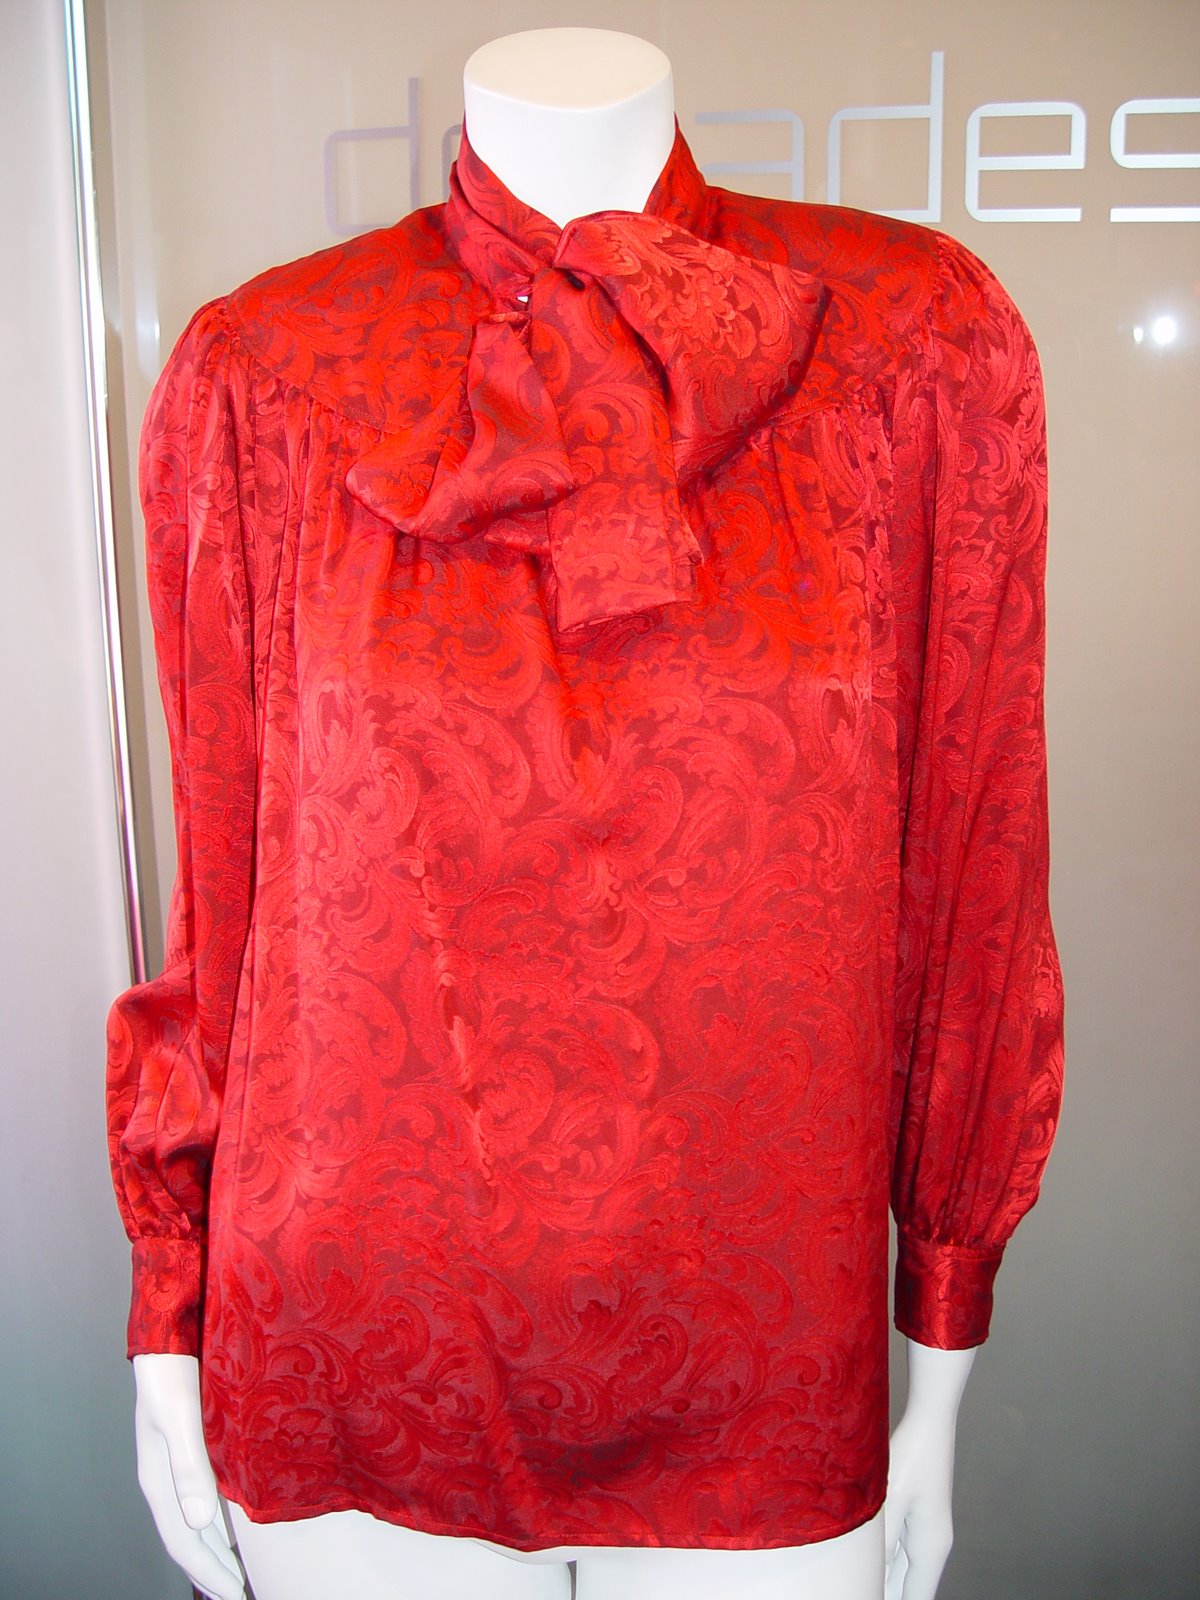 [YSL+GIVE+GAUCHE+RED+ON+RED+BAROQUE+MOTIF+PULLOVER+BLOUSE+WITH+YOLK+SHOULDER+FULL+SLEEVE+AND+BOW+TIE+SIZE+34+C+80S.JPG.JPG]